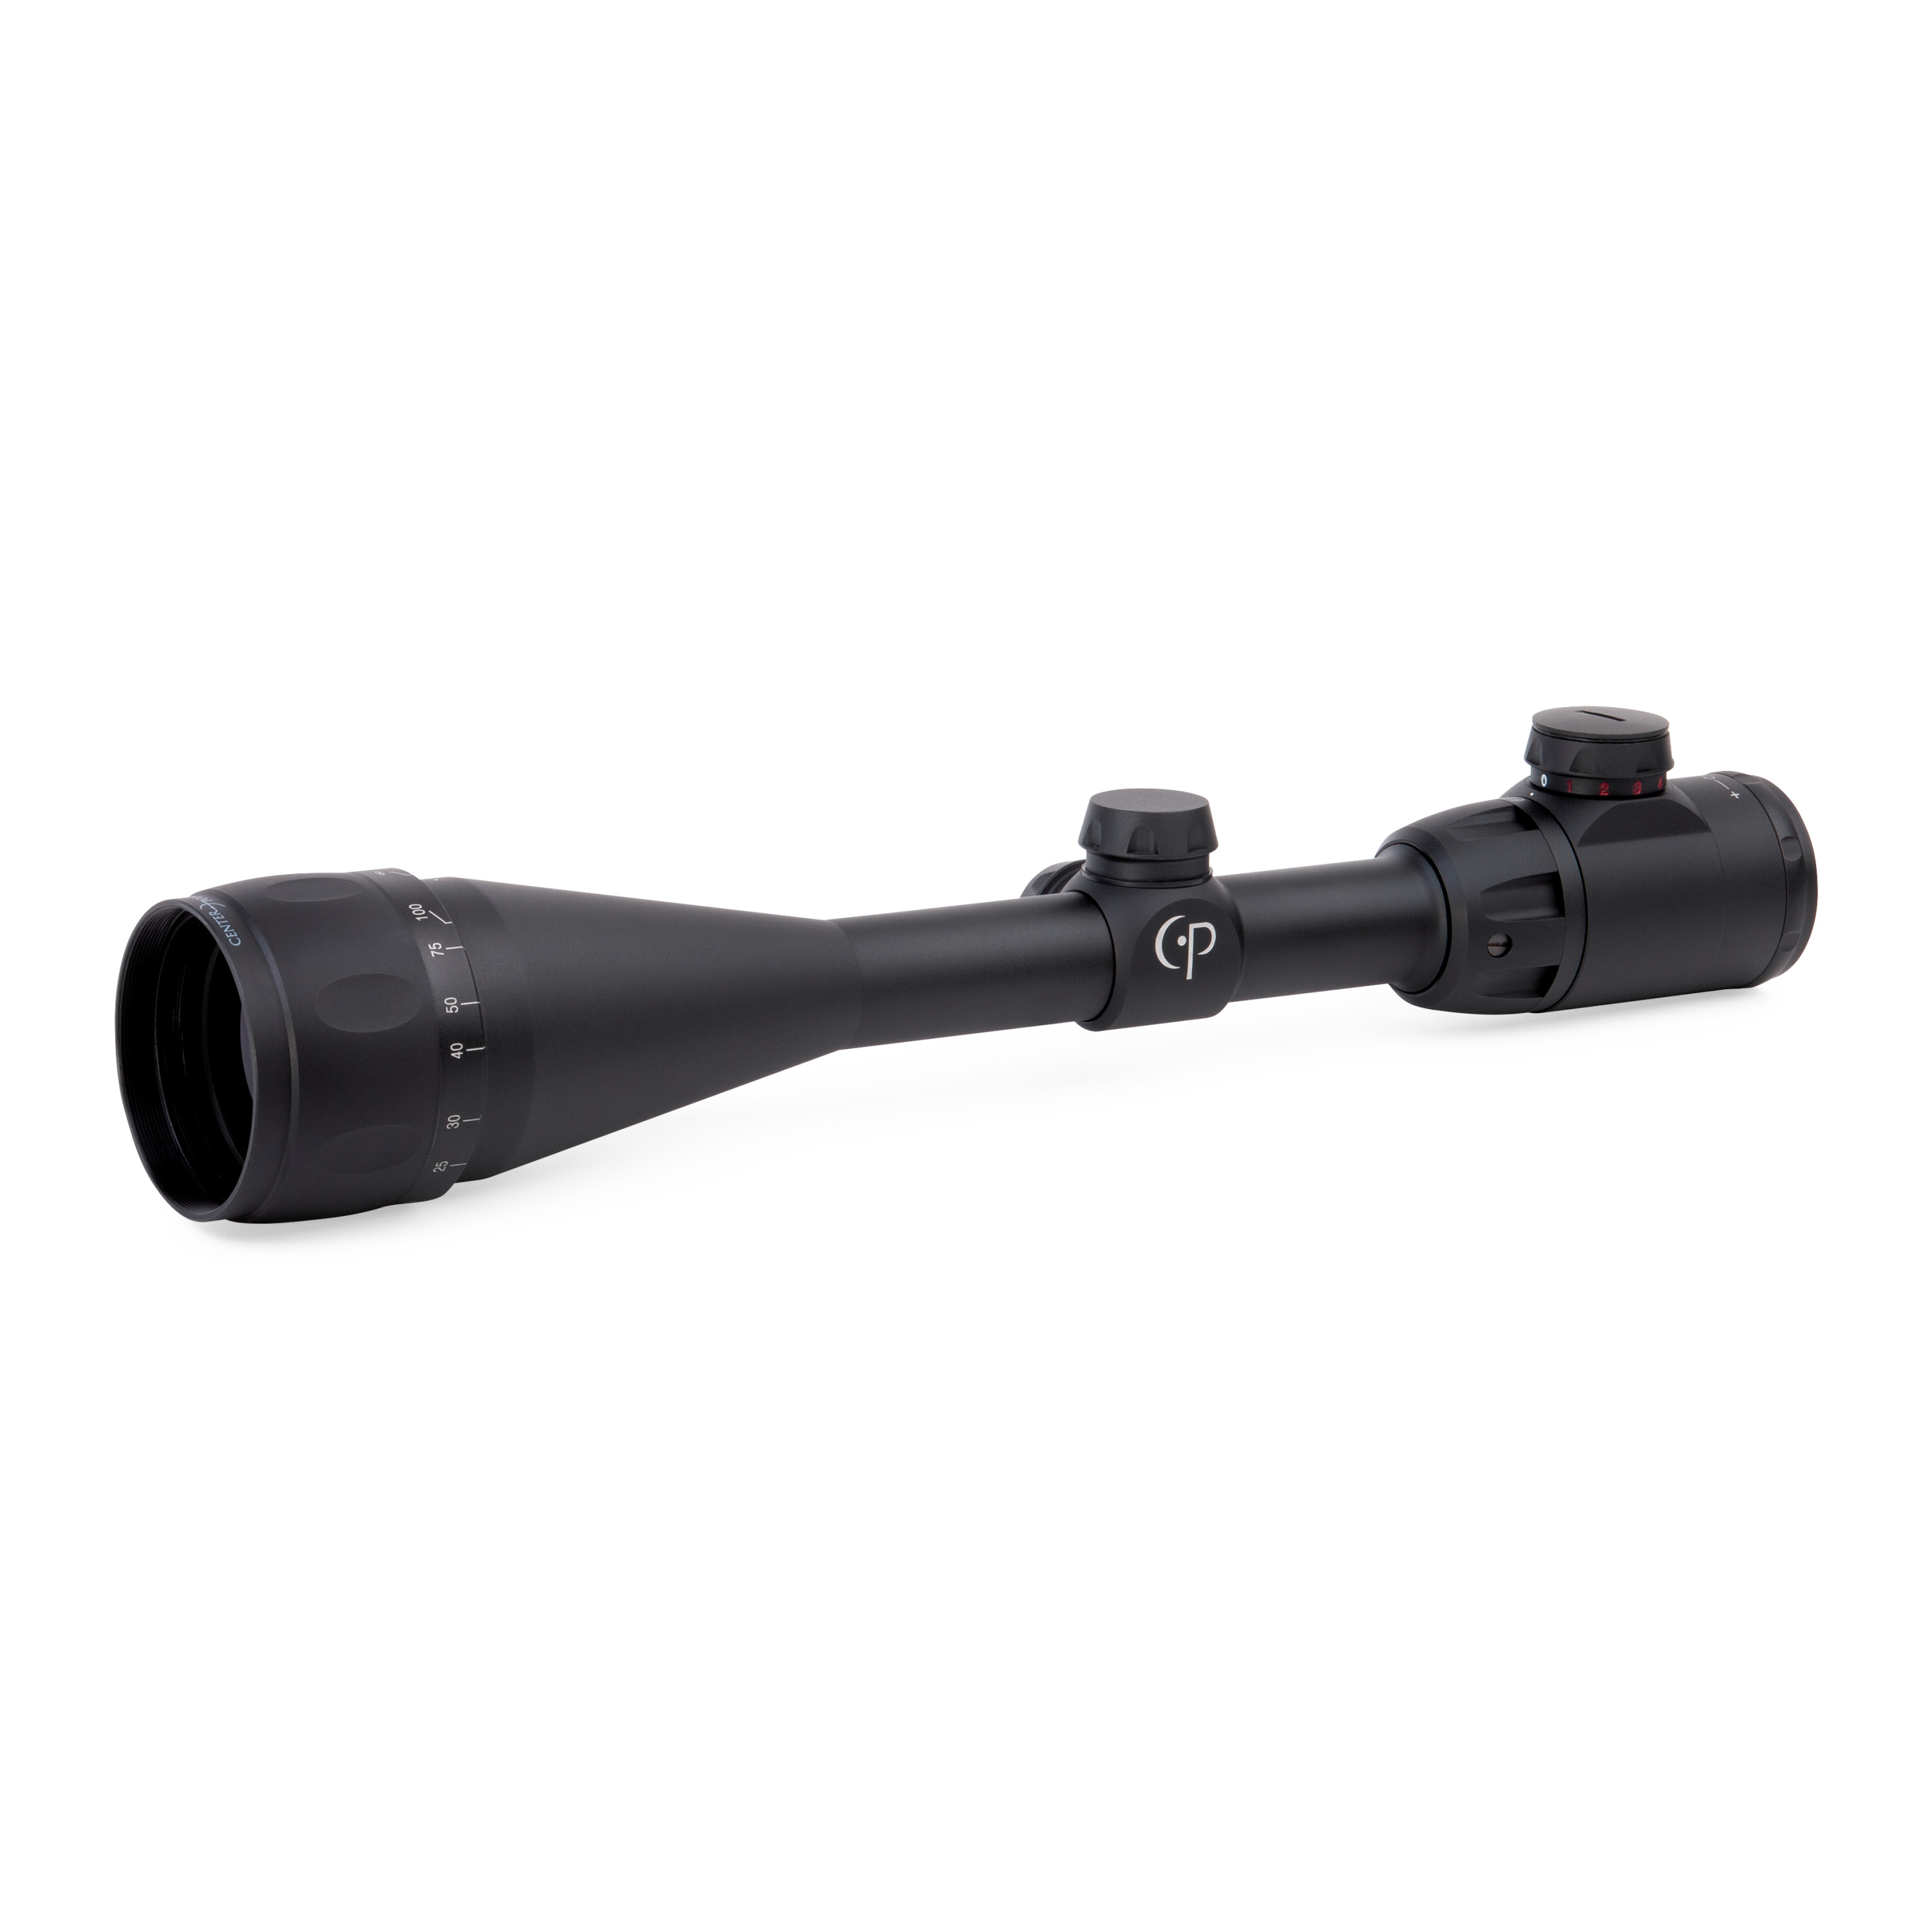 CenterPoint 6-20x50mm magnification, Riflescope with Tag and BDC Illuminated Reticle (Black) - image 1 of 14